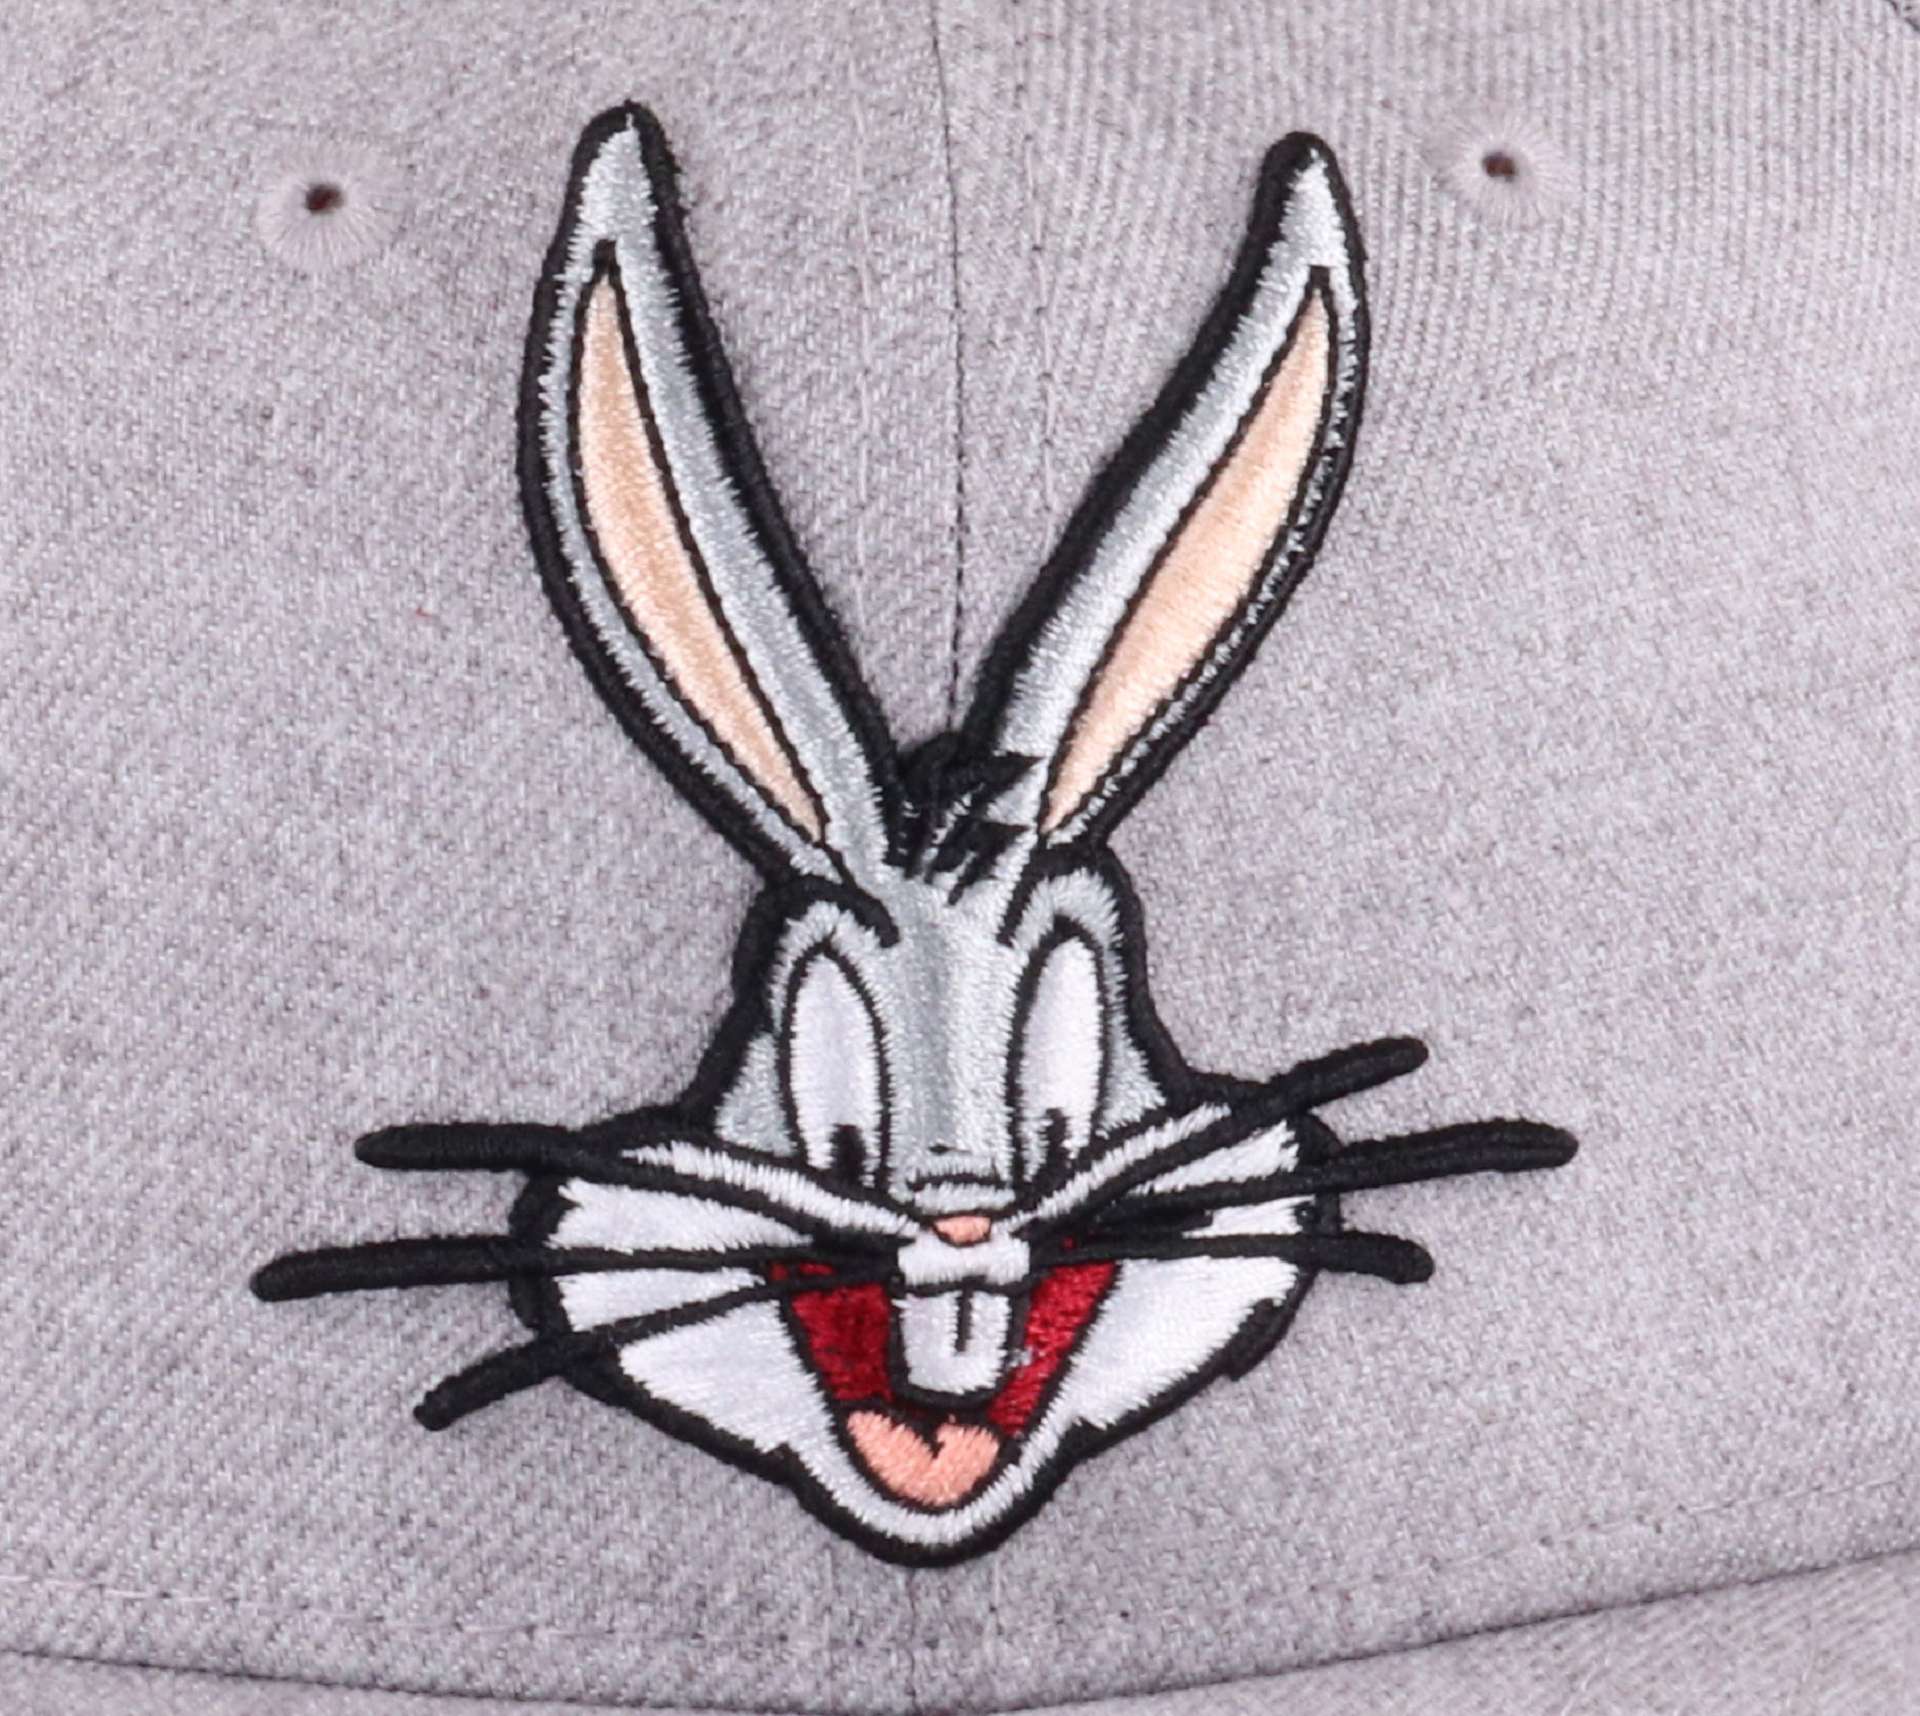 Looney Tunes Bugs Bunny Heather Gray 59Fifty Fitted Basecap New Era